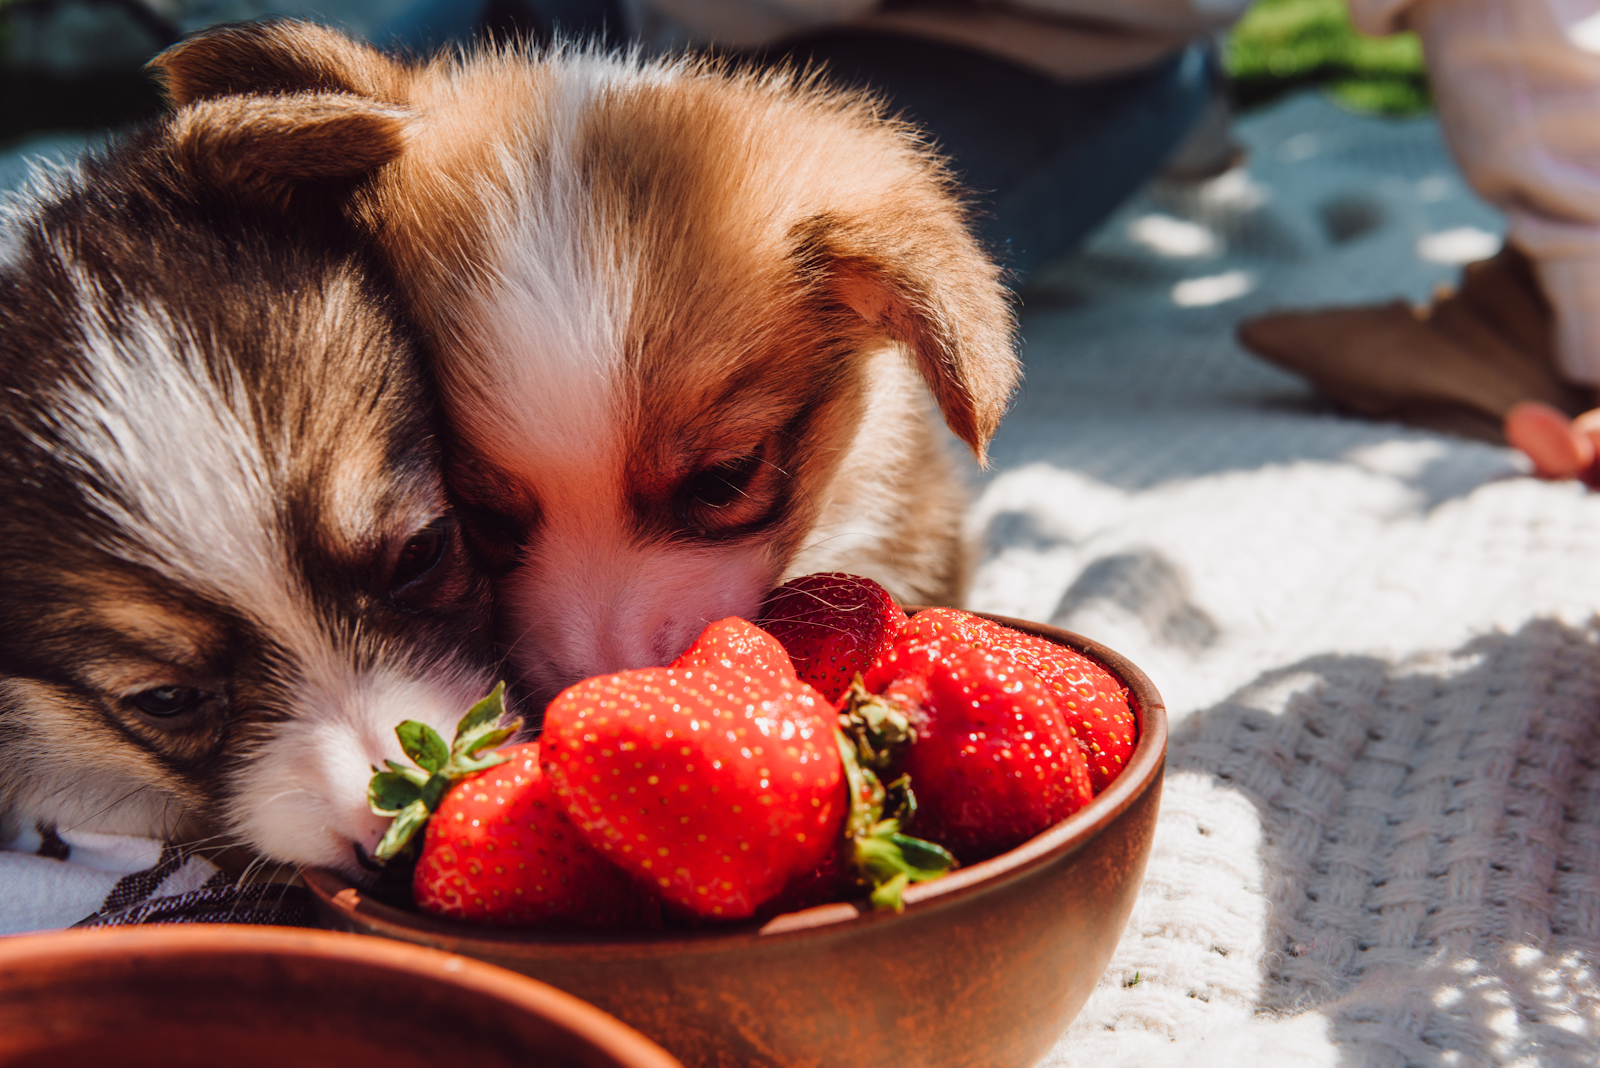 Can Dogs Eat Strawberries? Yes, As Long As You Follow Some Key Safeguards